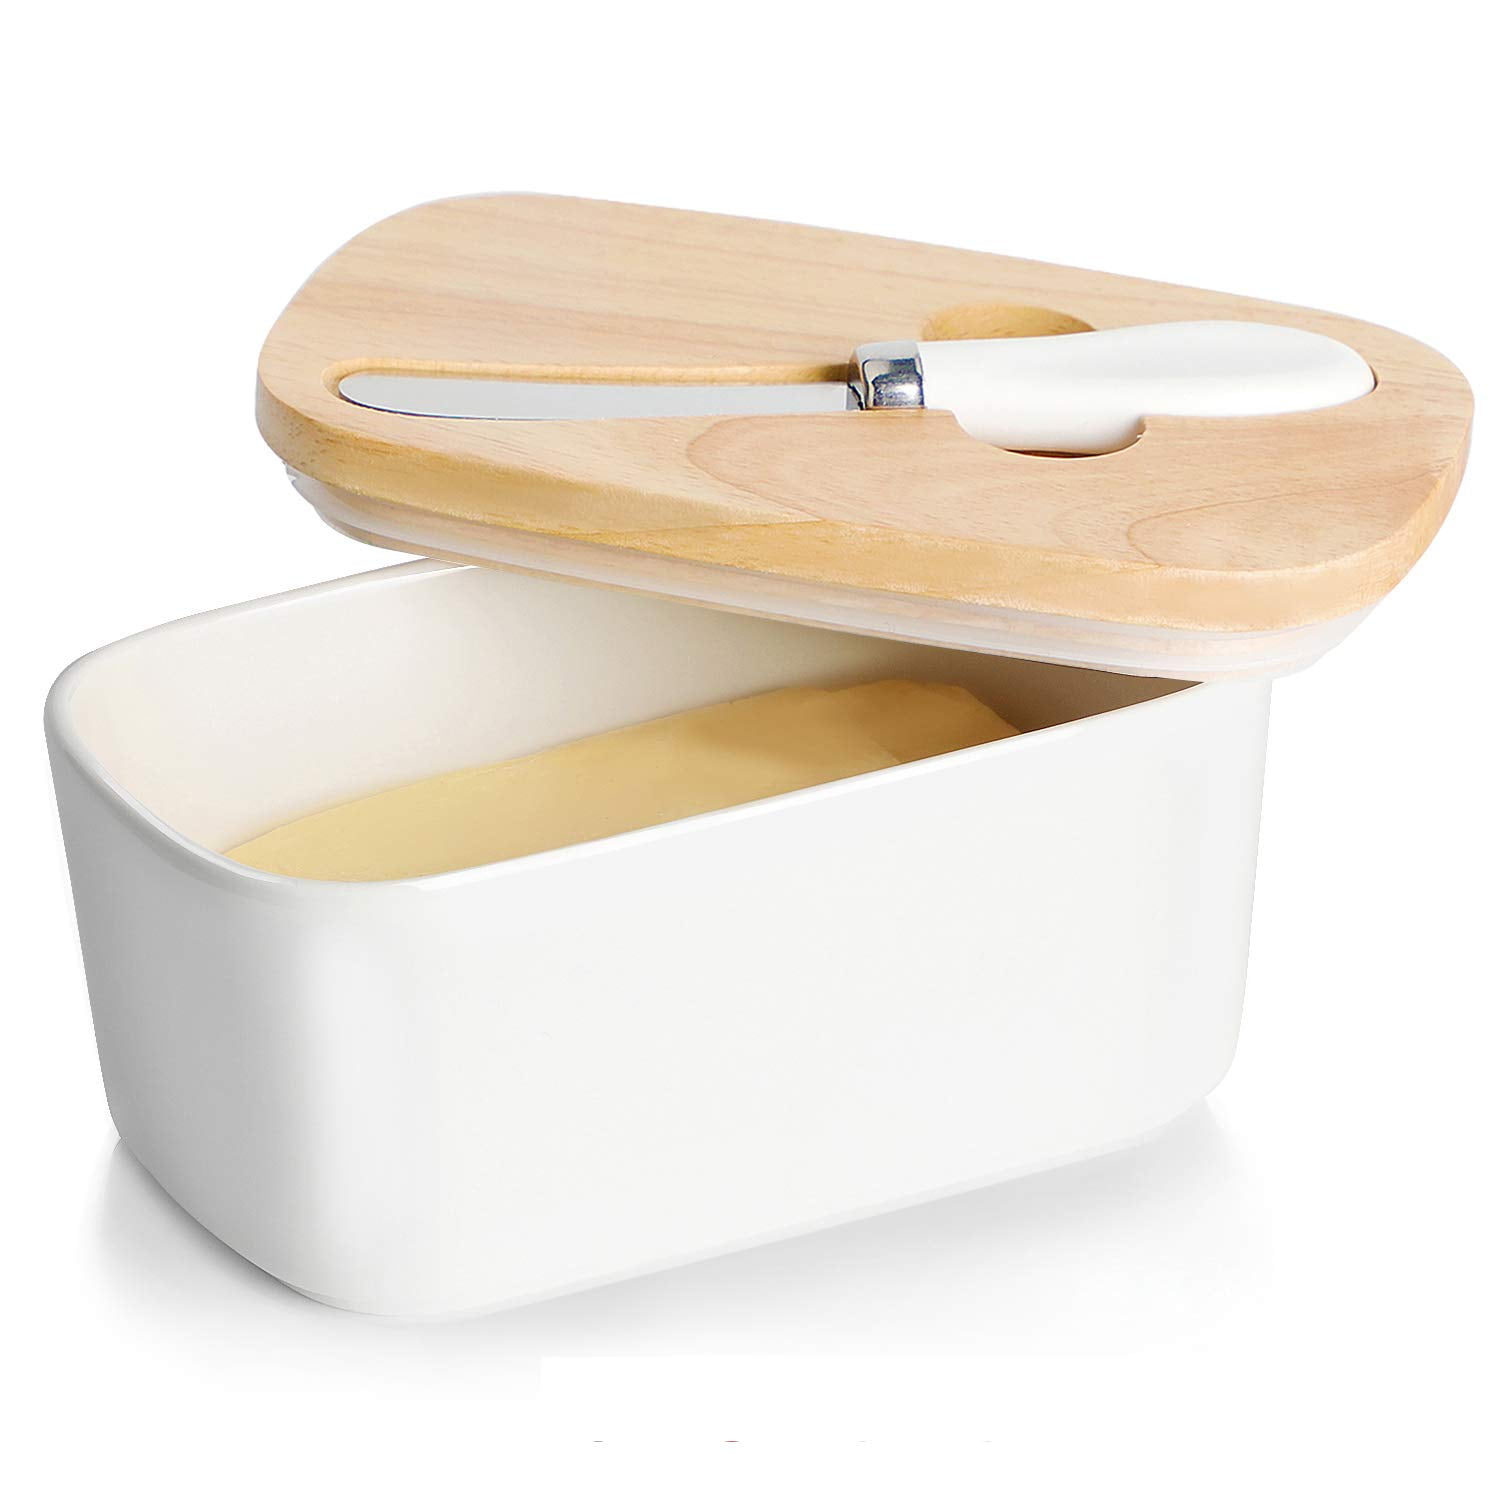 Personalized Butter Dish With Wooden Lid Unique Kitchen Gift for